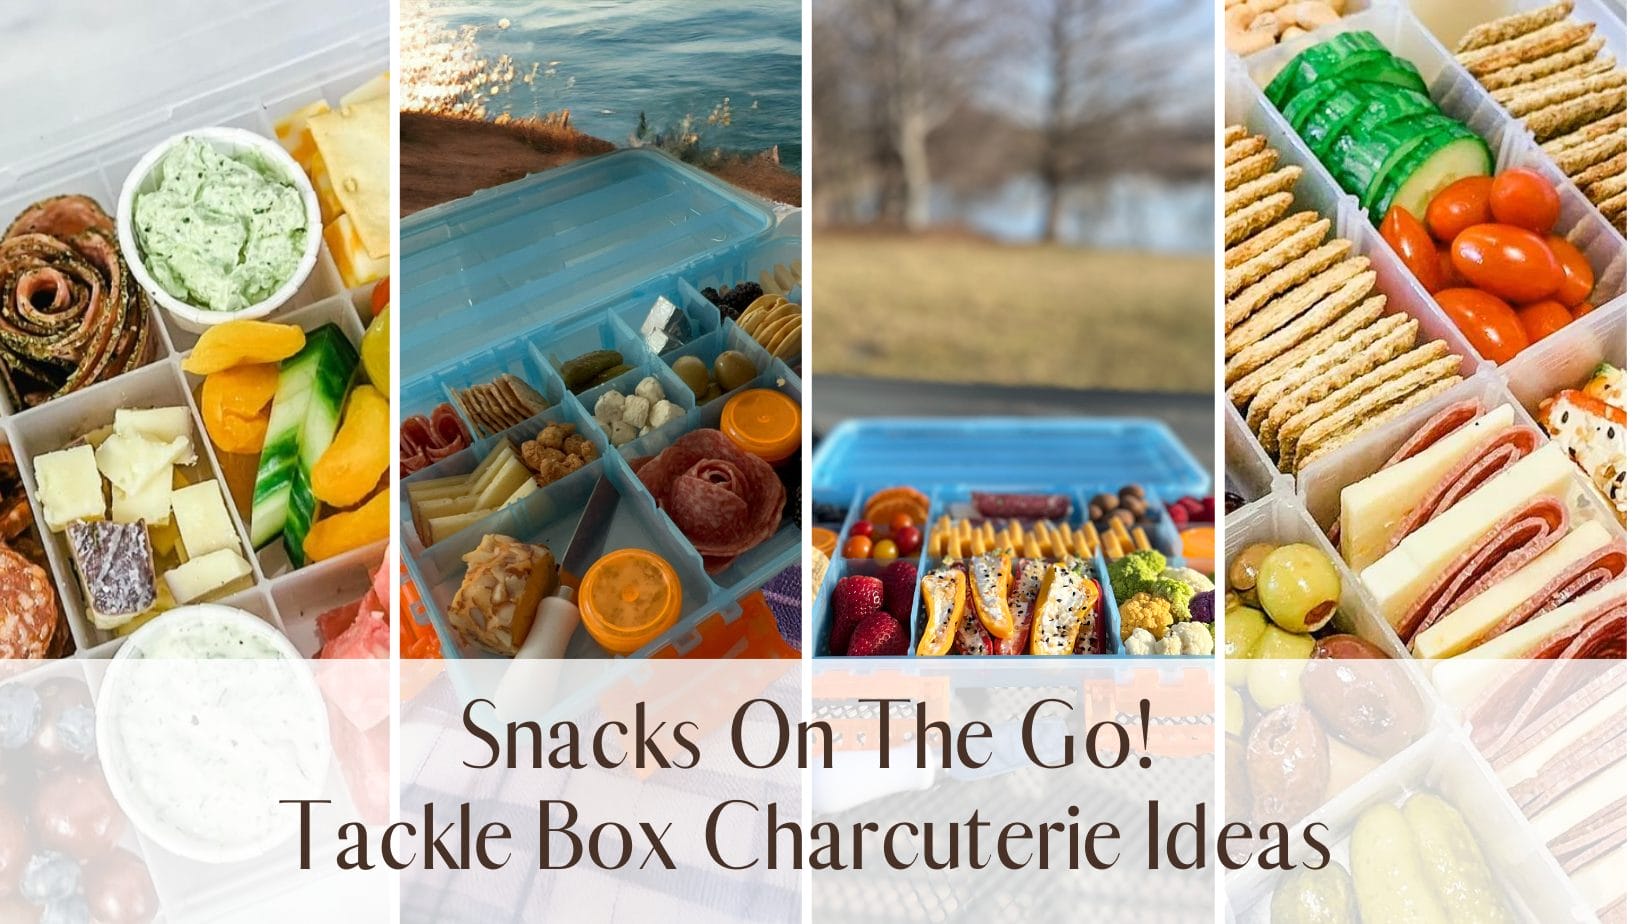 Making Vegan Snackle Boxes  The best portable snacks! 